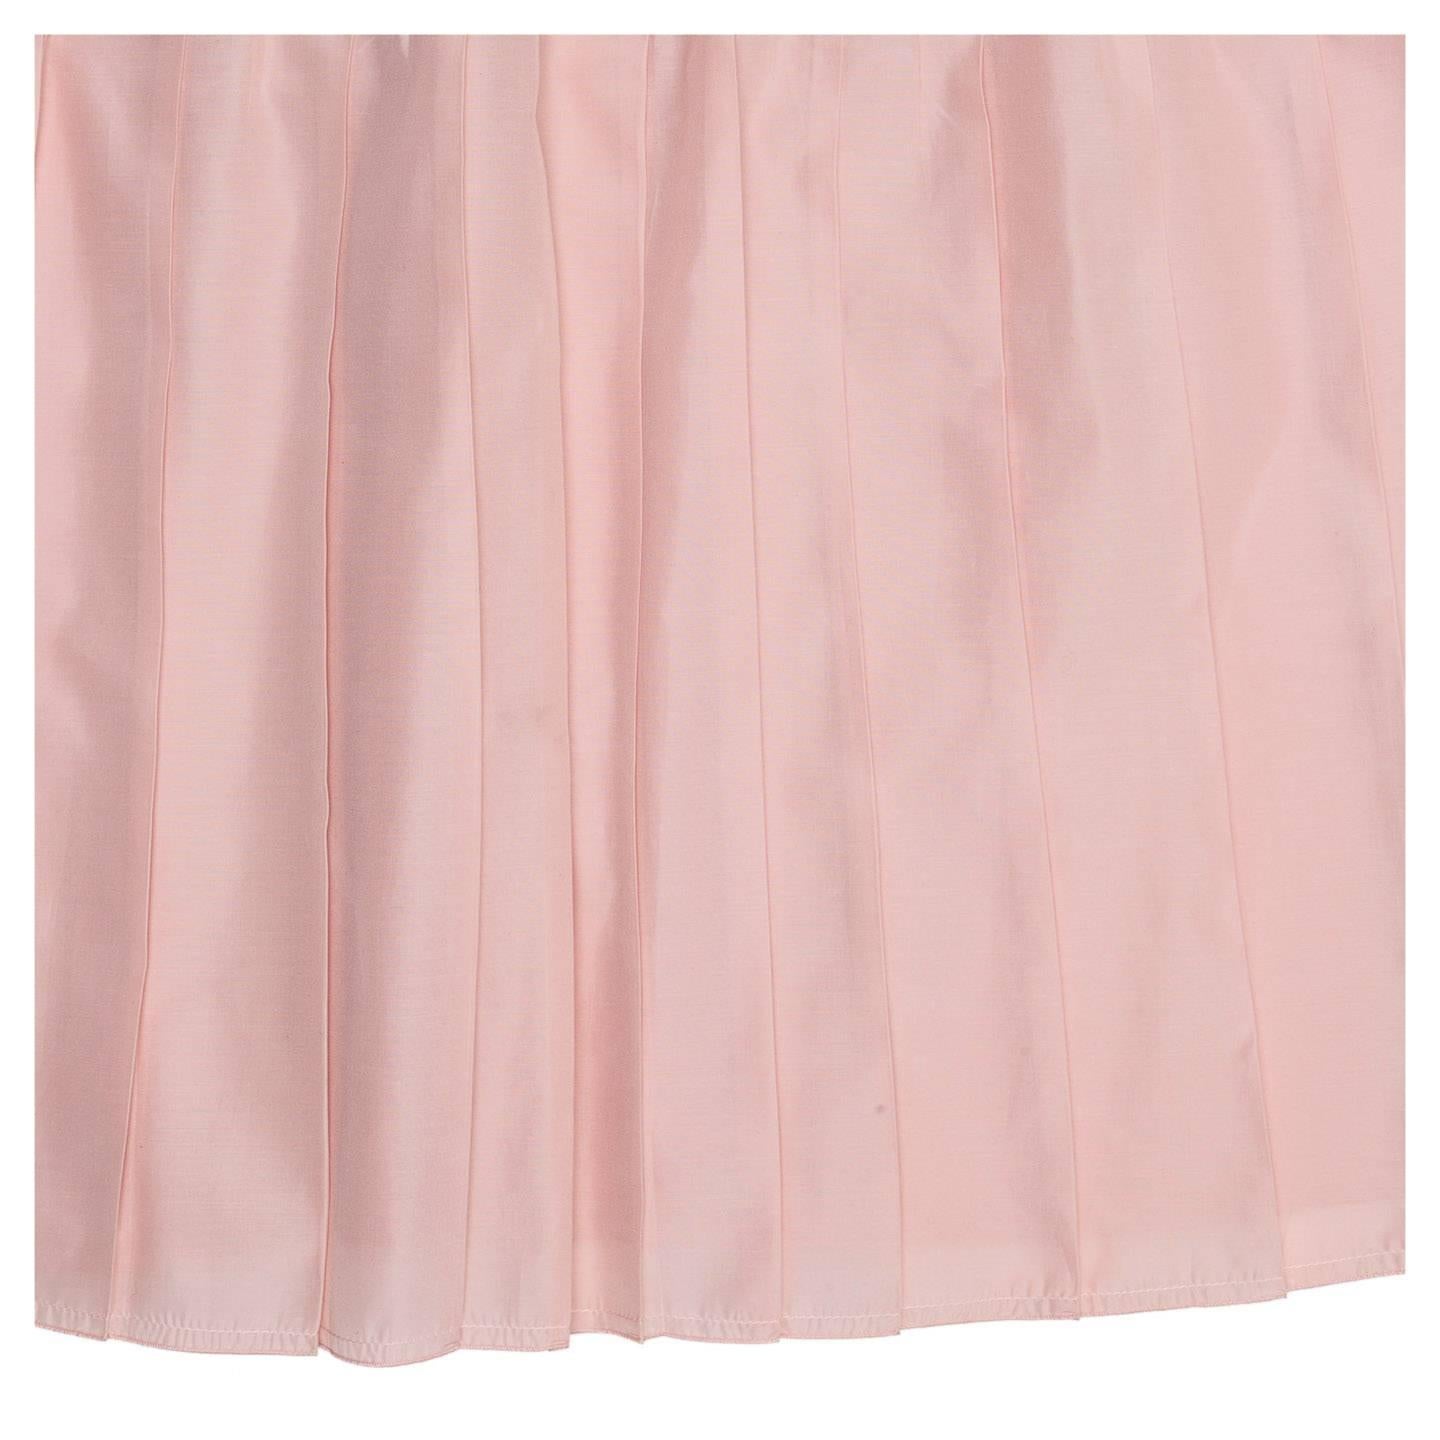 Jil Sander Pink Bustier Pleated Dress In Excellent Condition For Sale In Brooklyn, NY